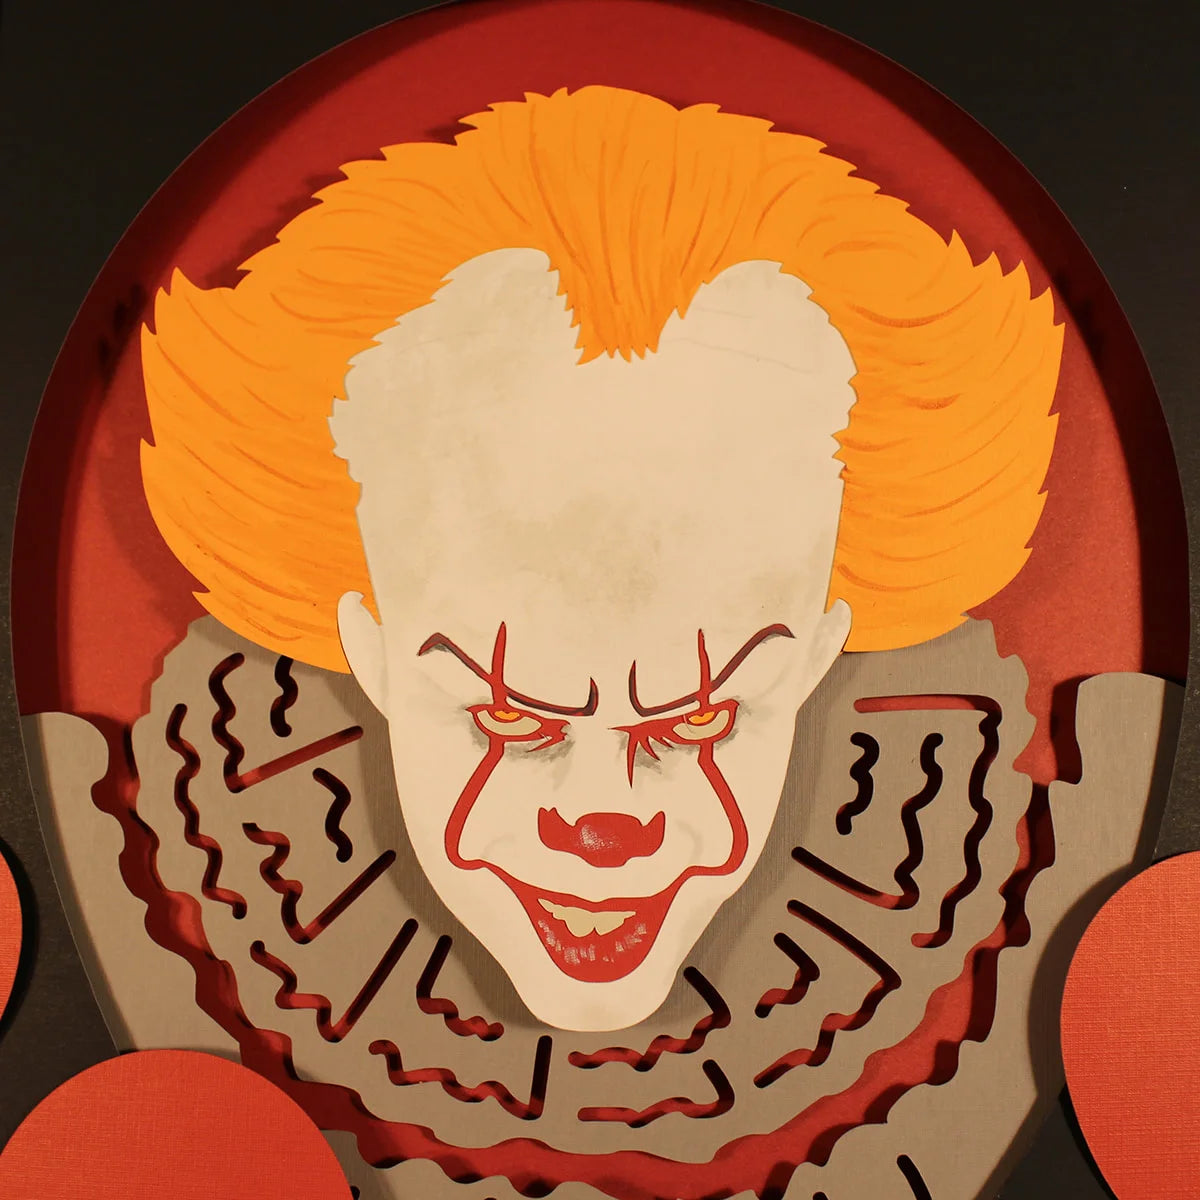 It the Clown Pennywise